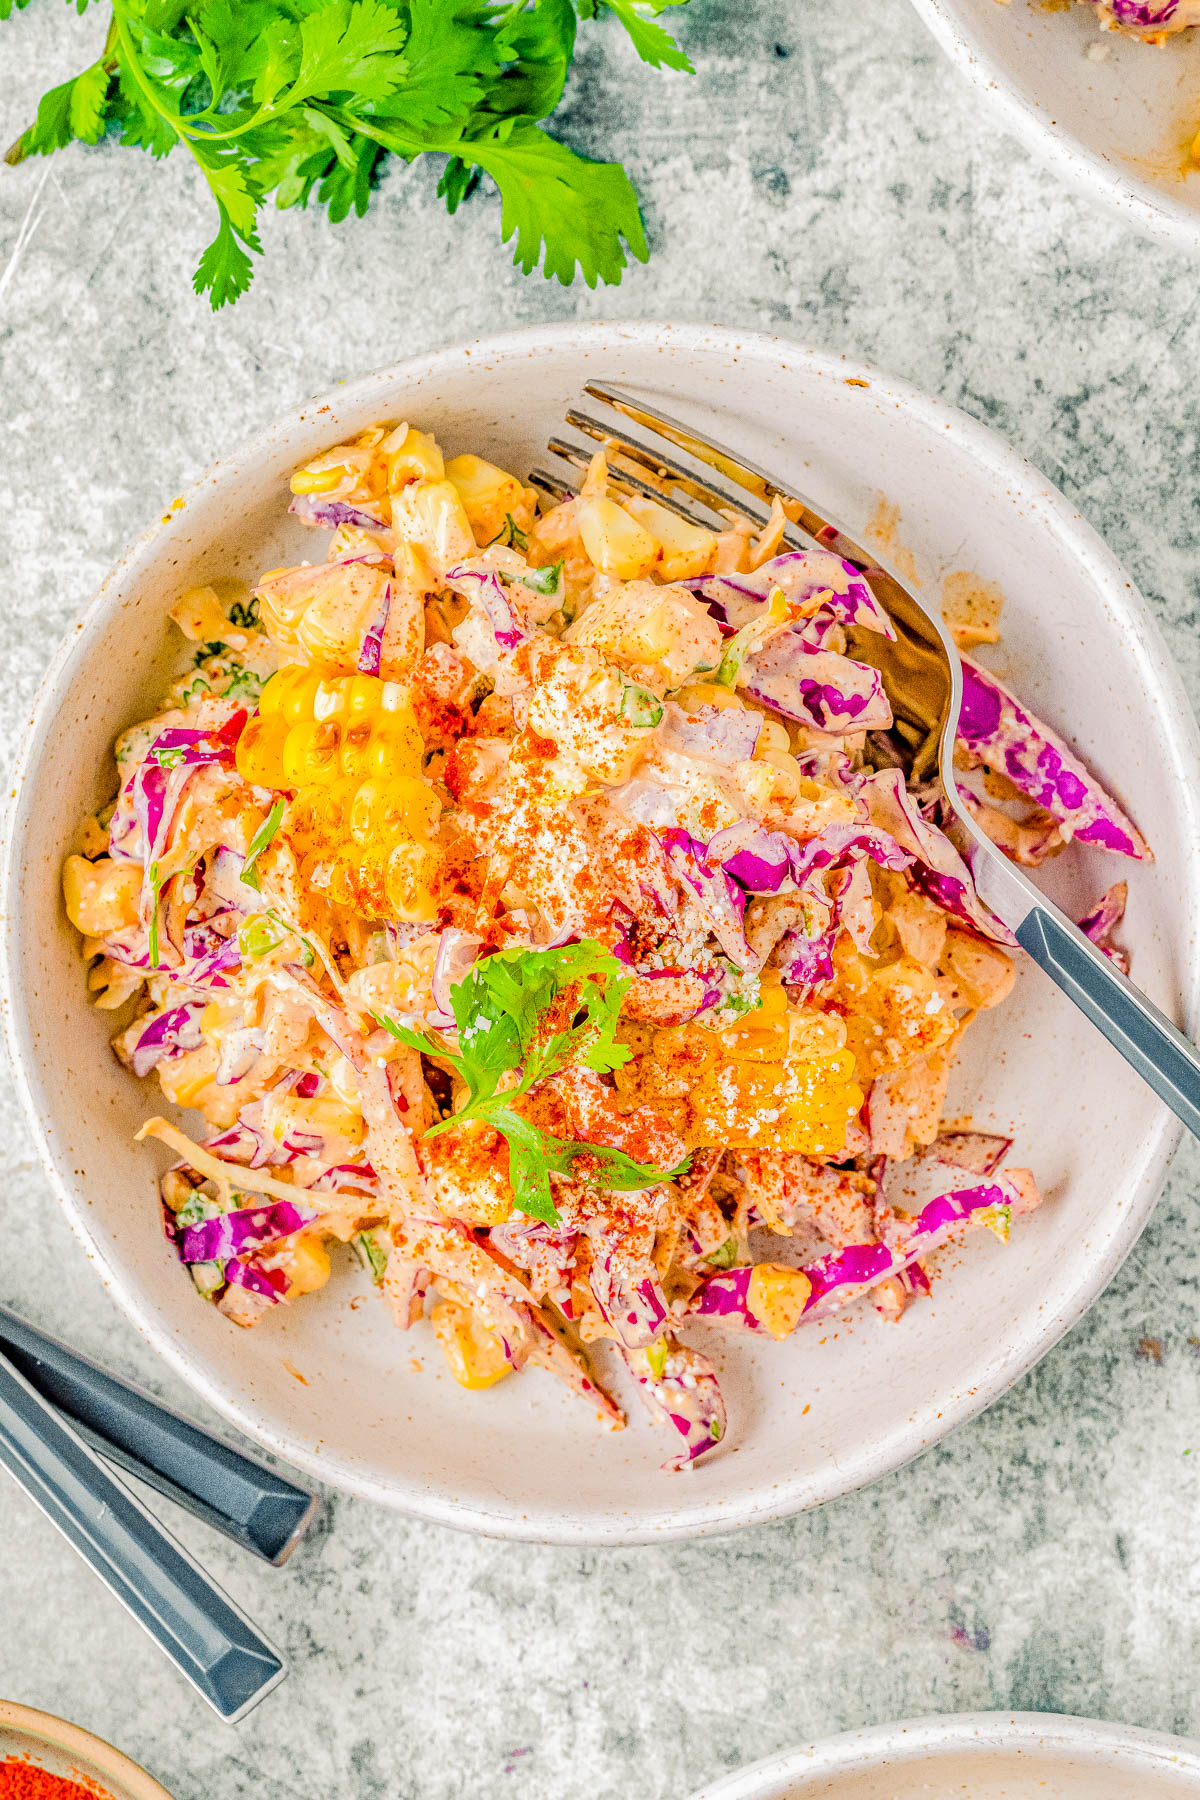 A vibrant bowl of coleslaw with red cabbage, carrot, corn, and herbs, topped with a sprinkle of paprika, served on a textured gray surface.